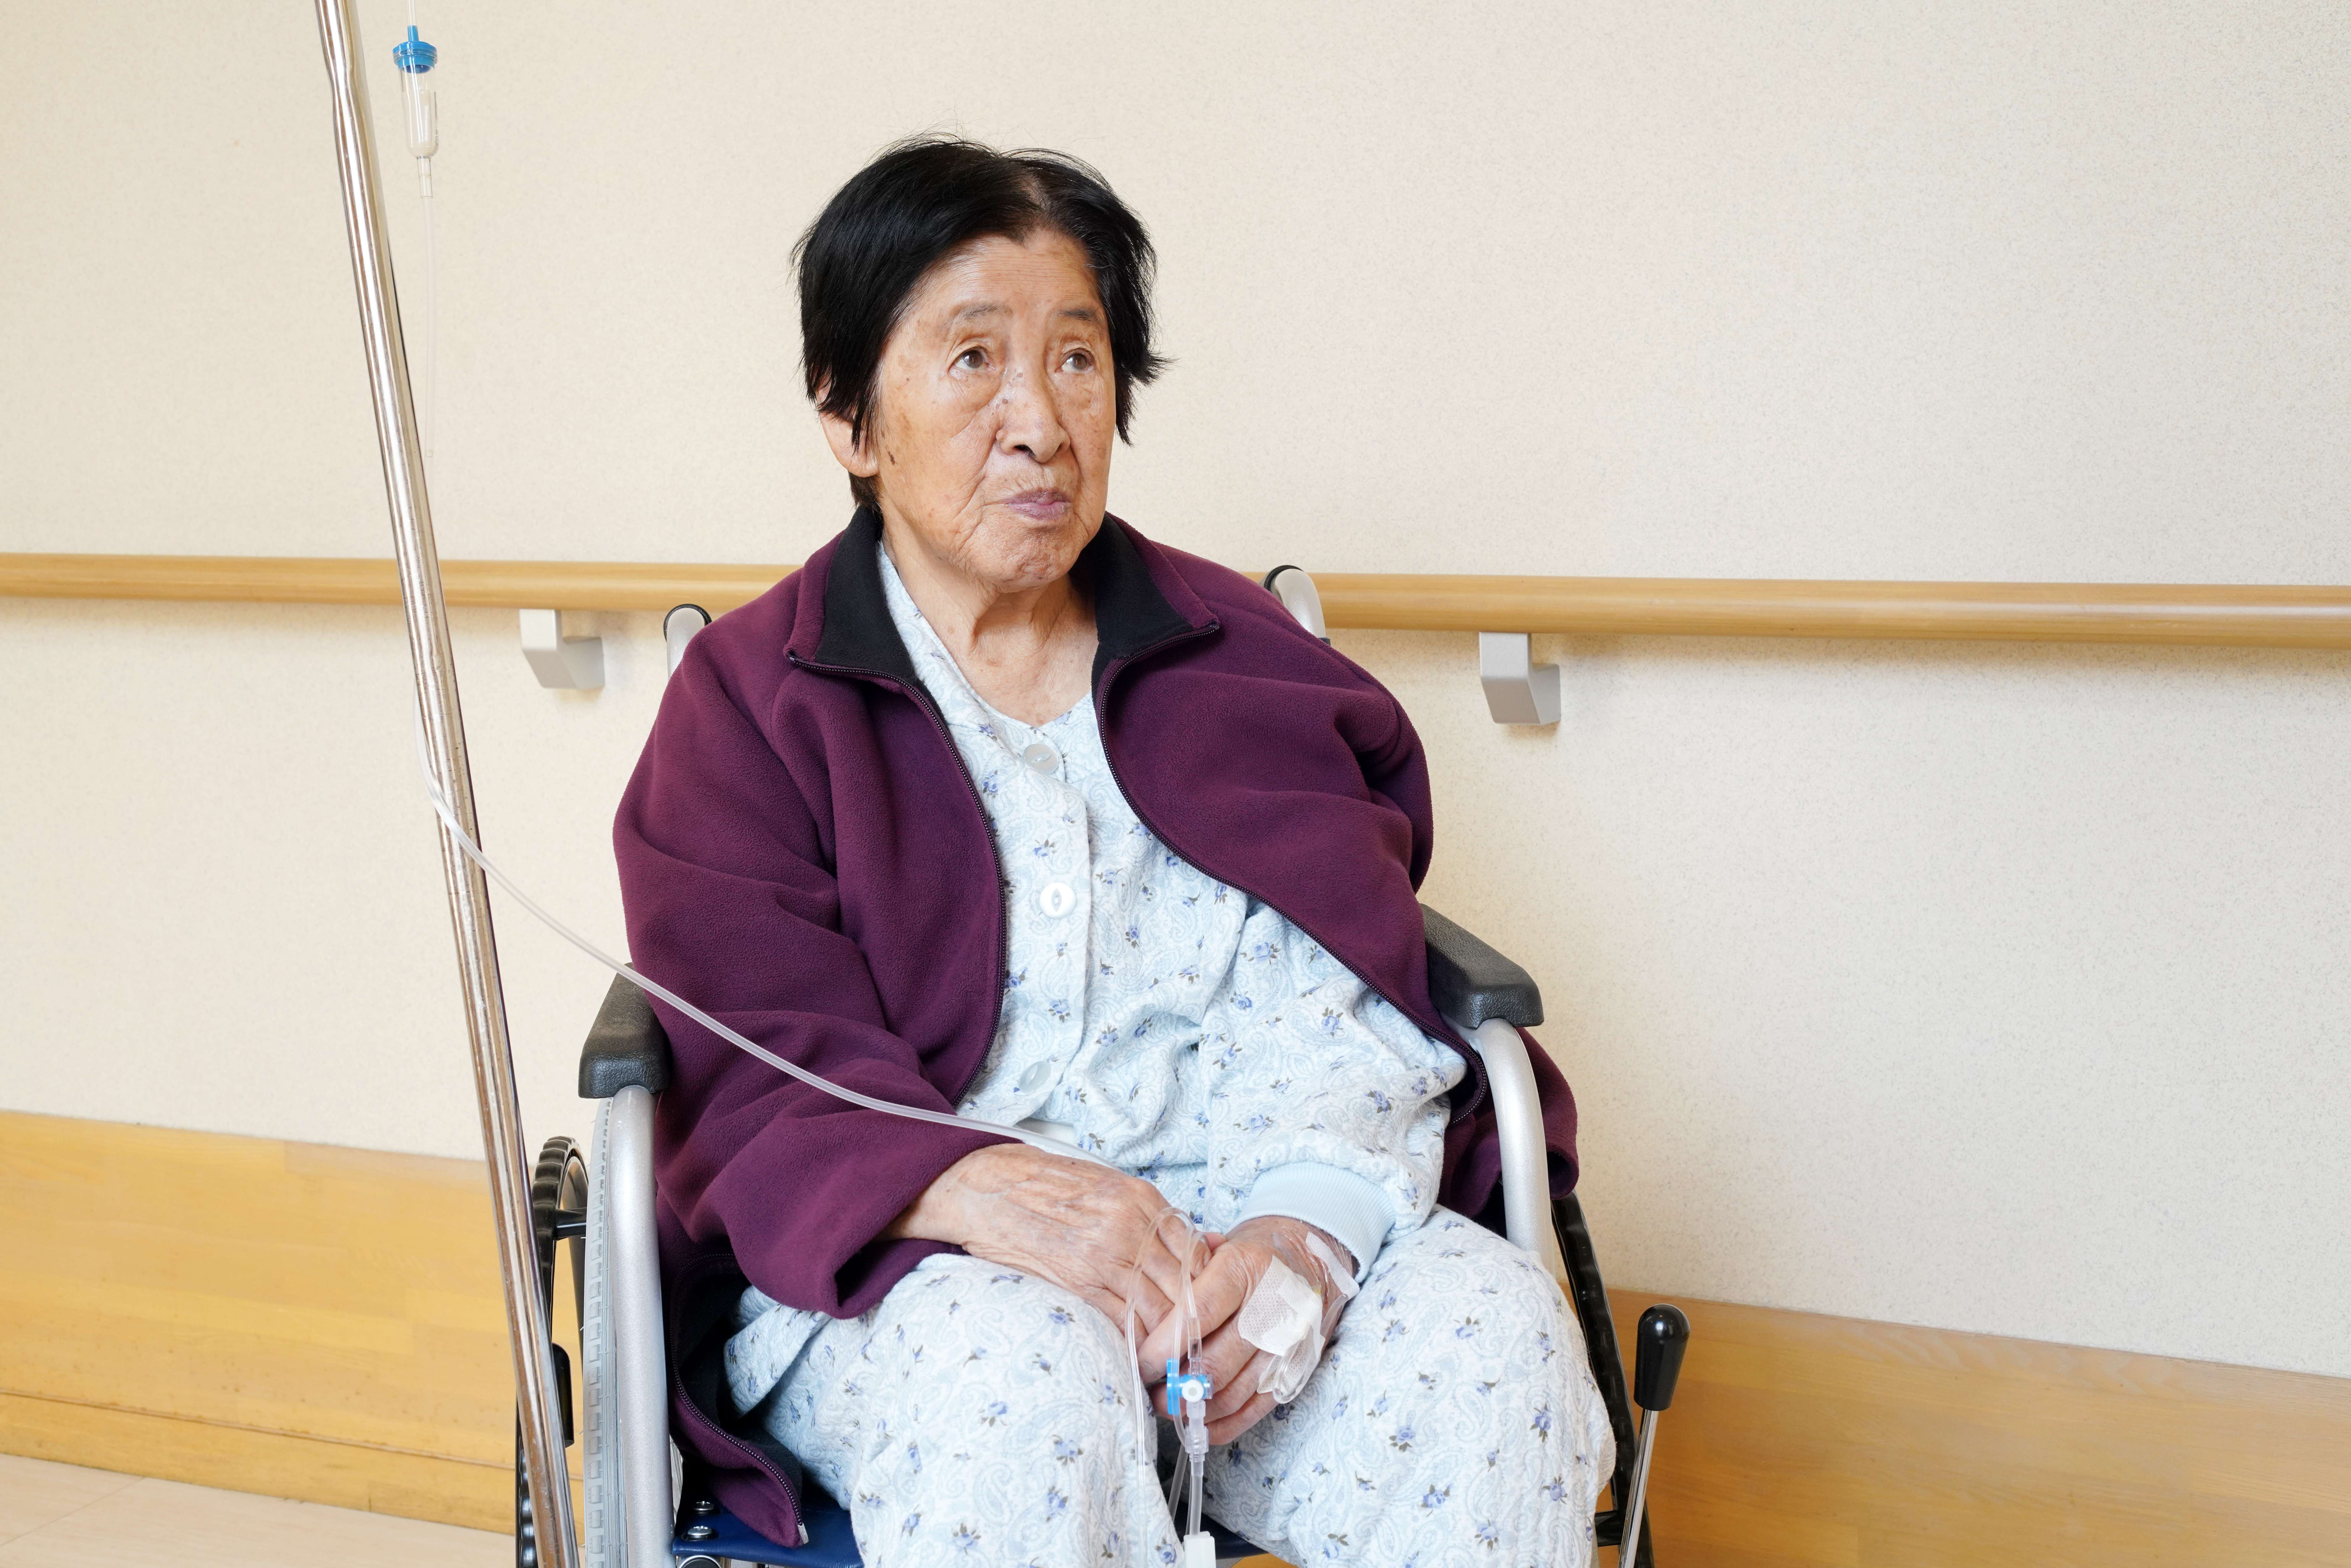 How can i report nursing home abuse?